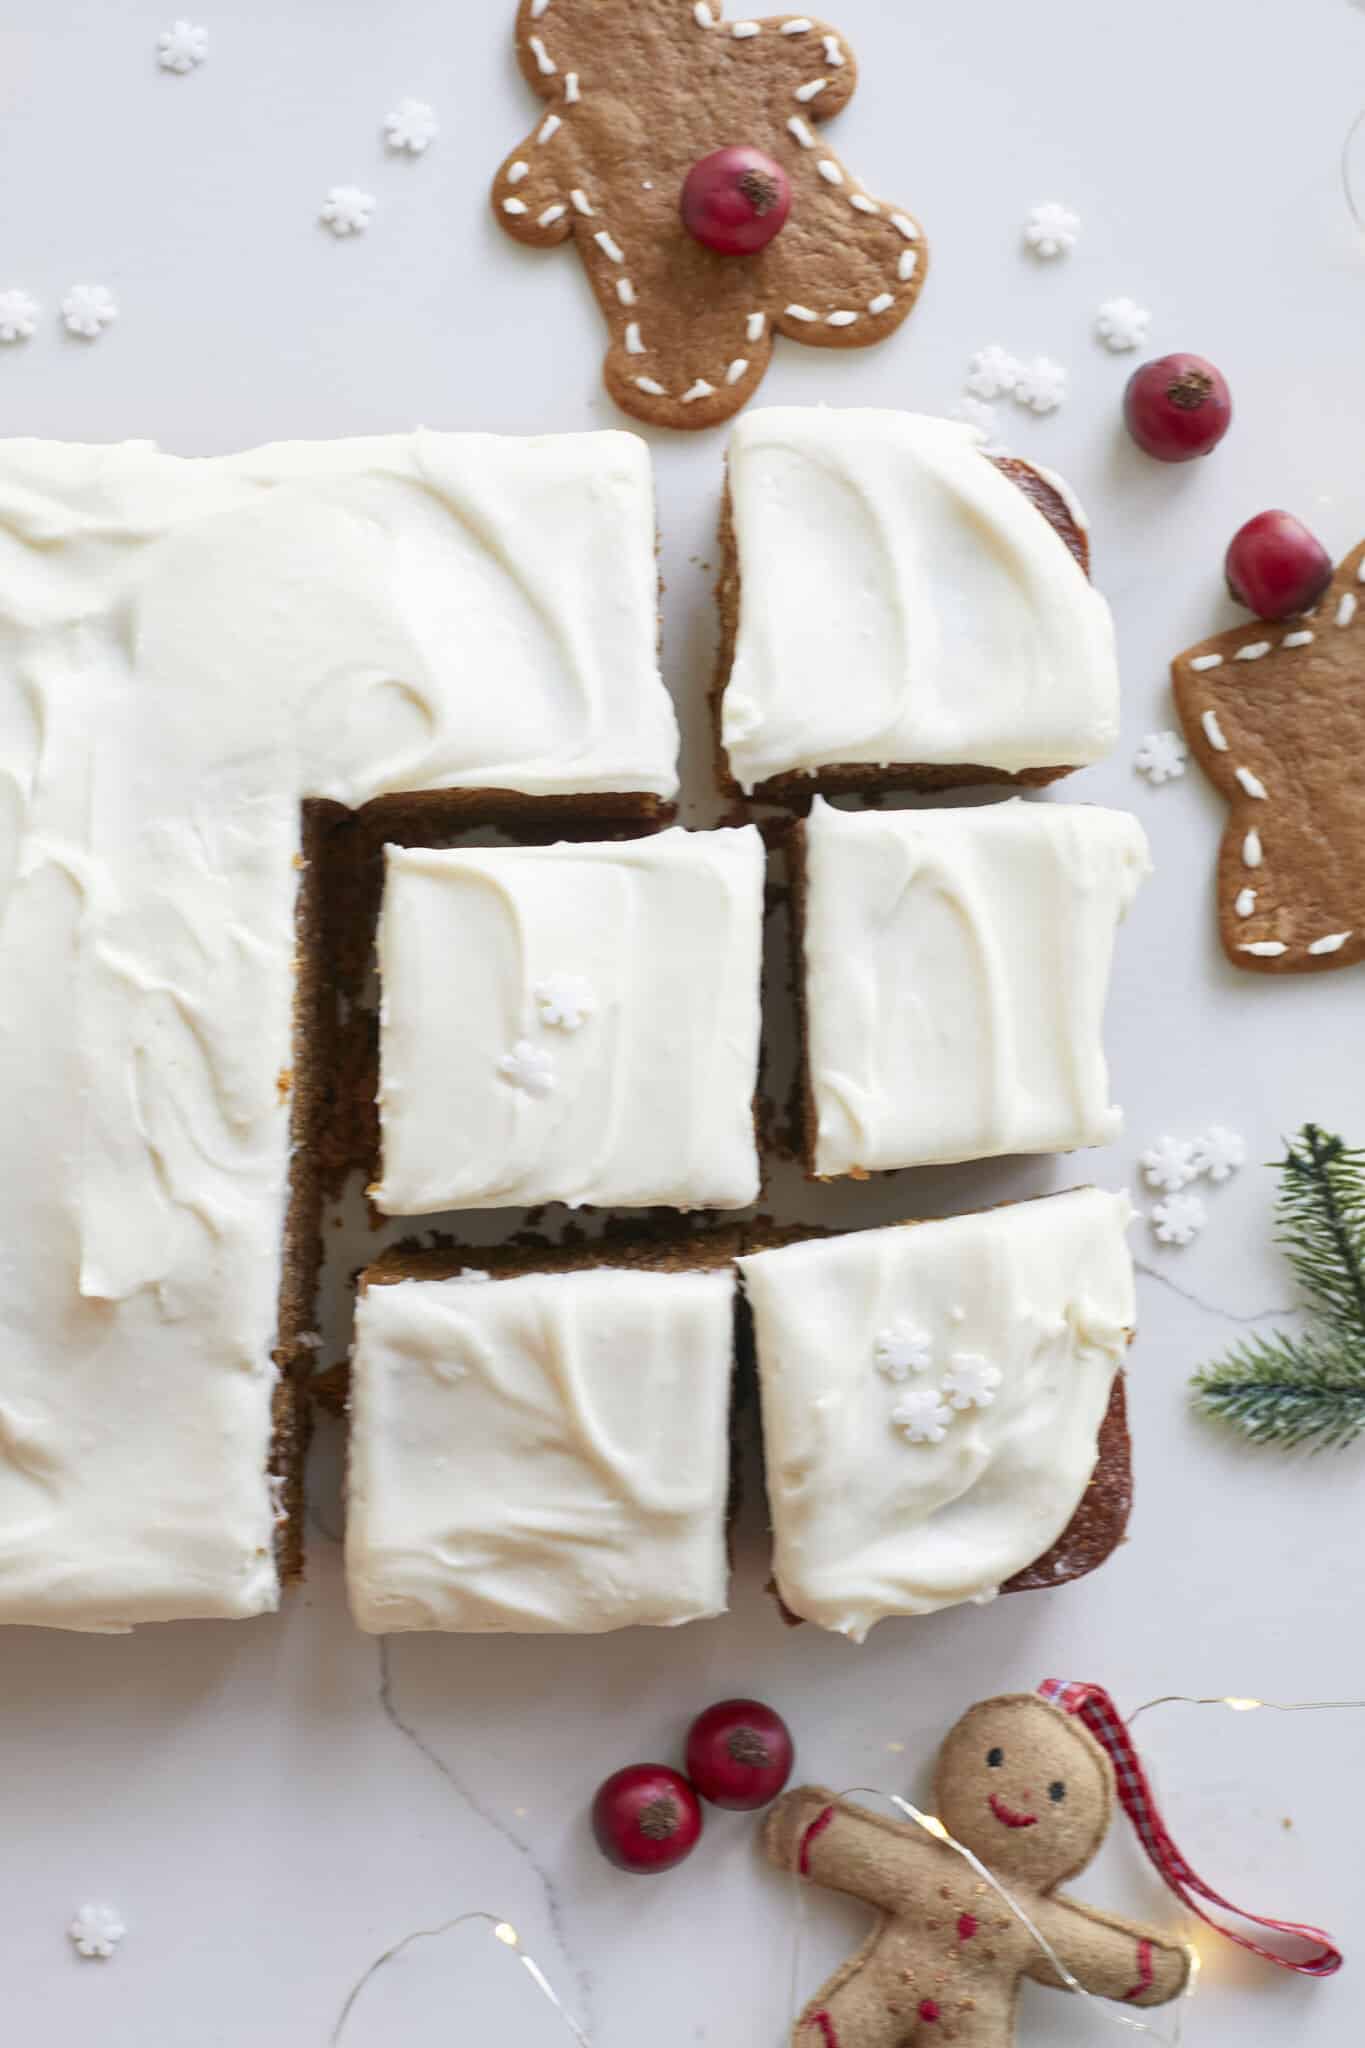 A Perfectly-Spiced Gingerbread Sheet Cake is cut into generous squares and ready for serving. The cake is moist and soft, topped with velvety cream cheese frosting. 